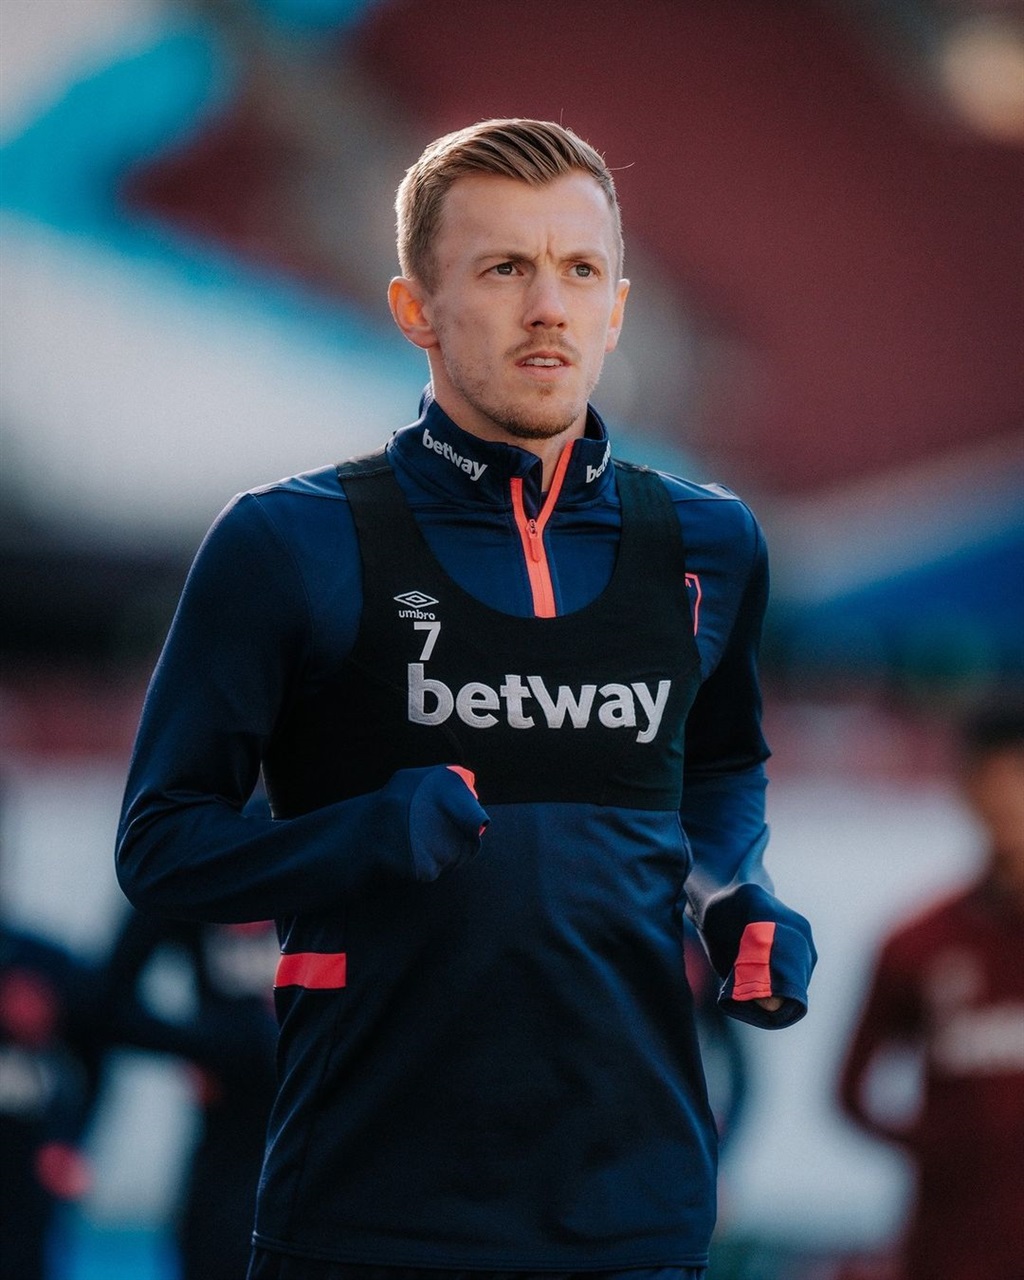 West Ham star James Ward-Prowse rated some free-kicks taken in the DStv Premiership from the current and previous campaign.